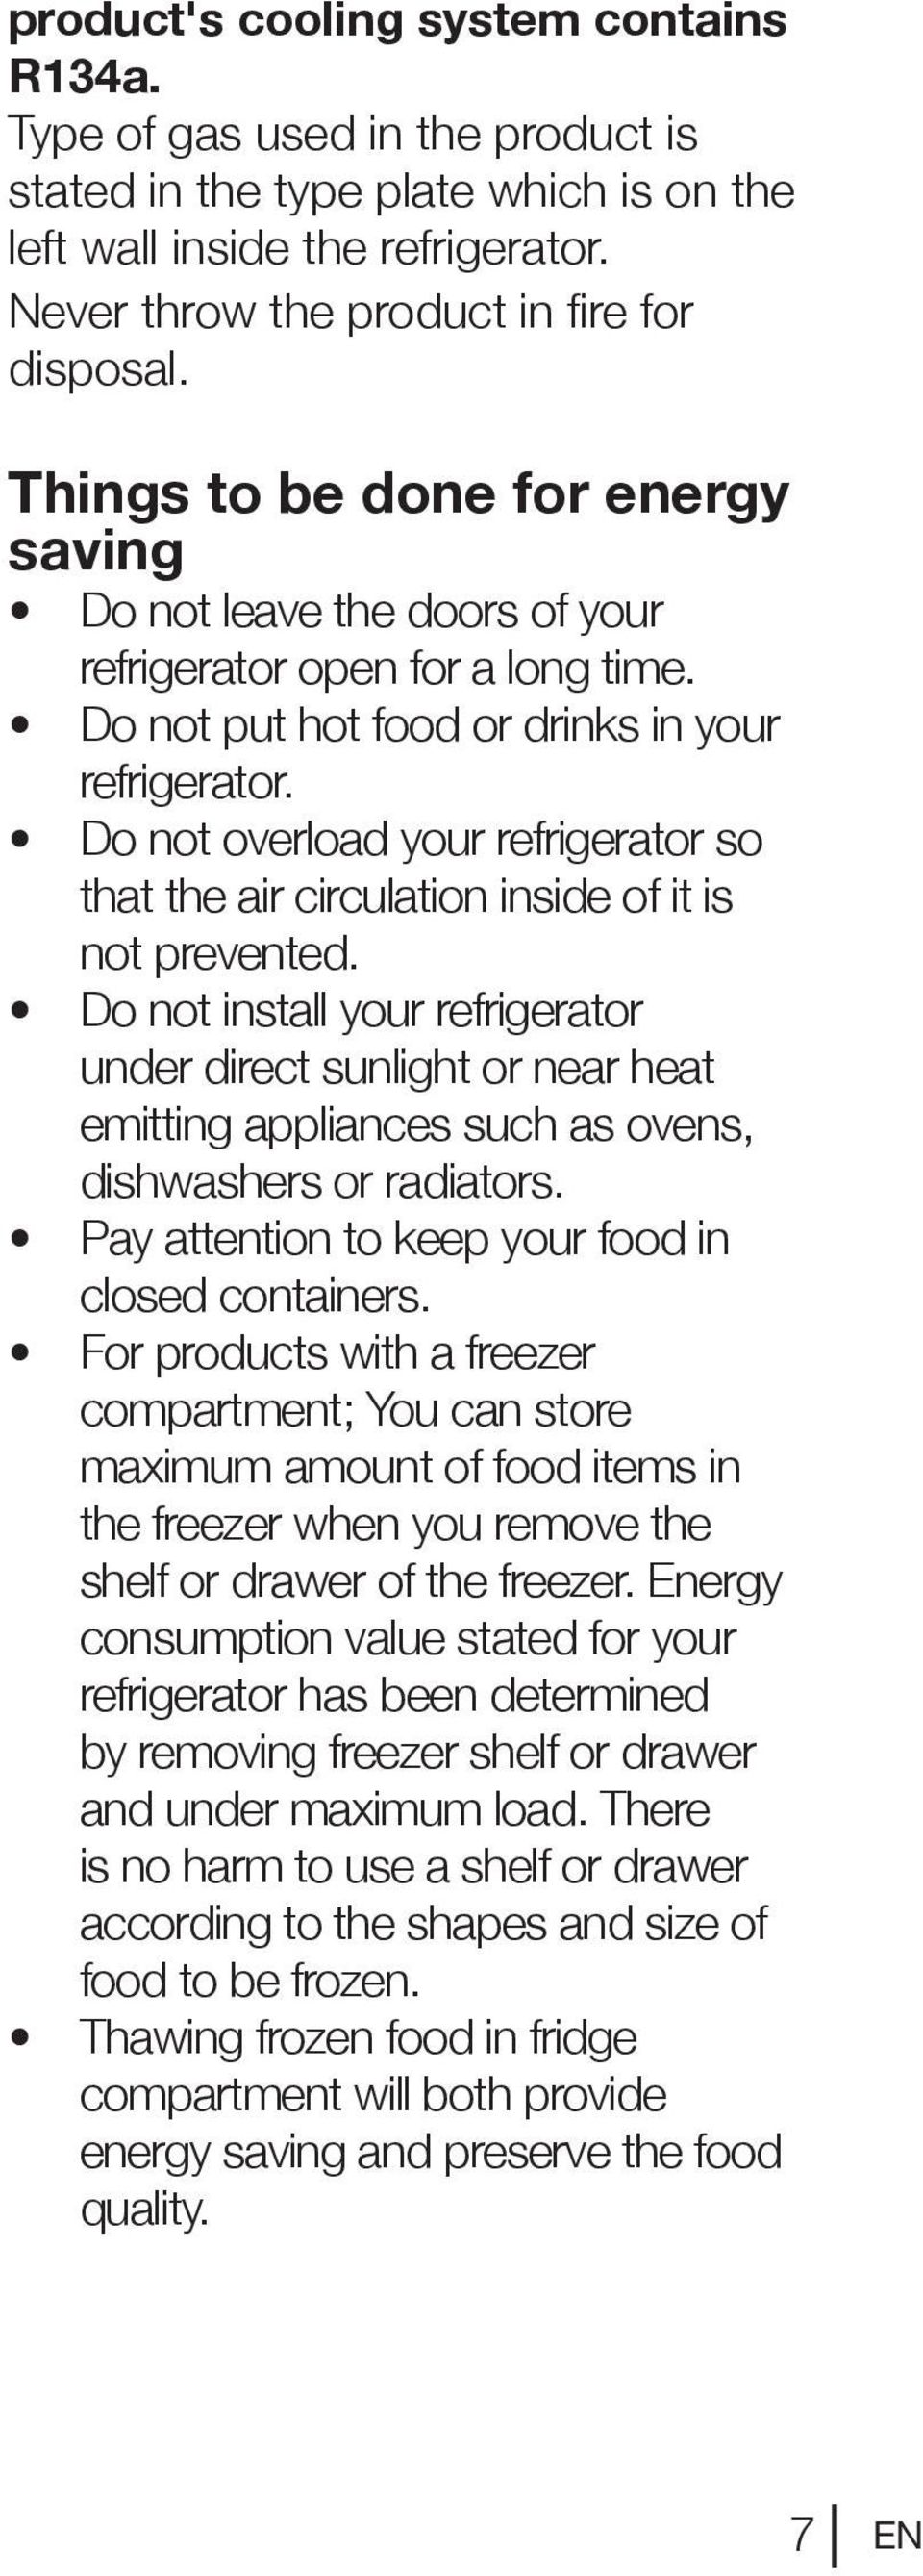 Do not overload your refrigerator so that the air circulation inside of it is not prevented.